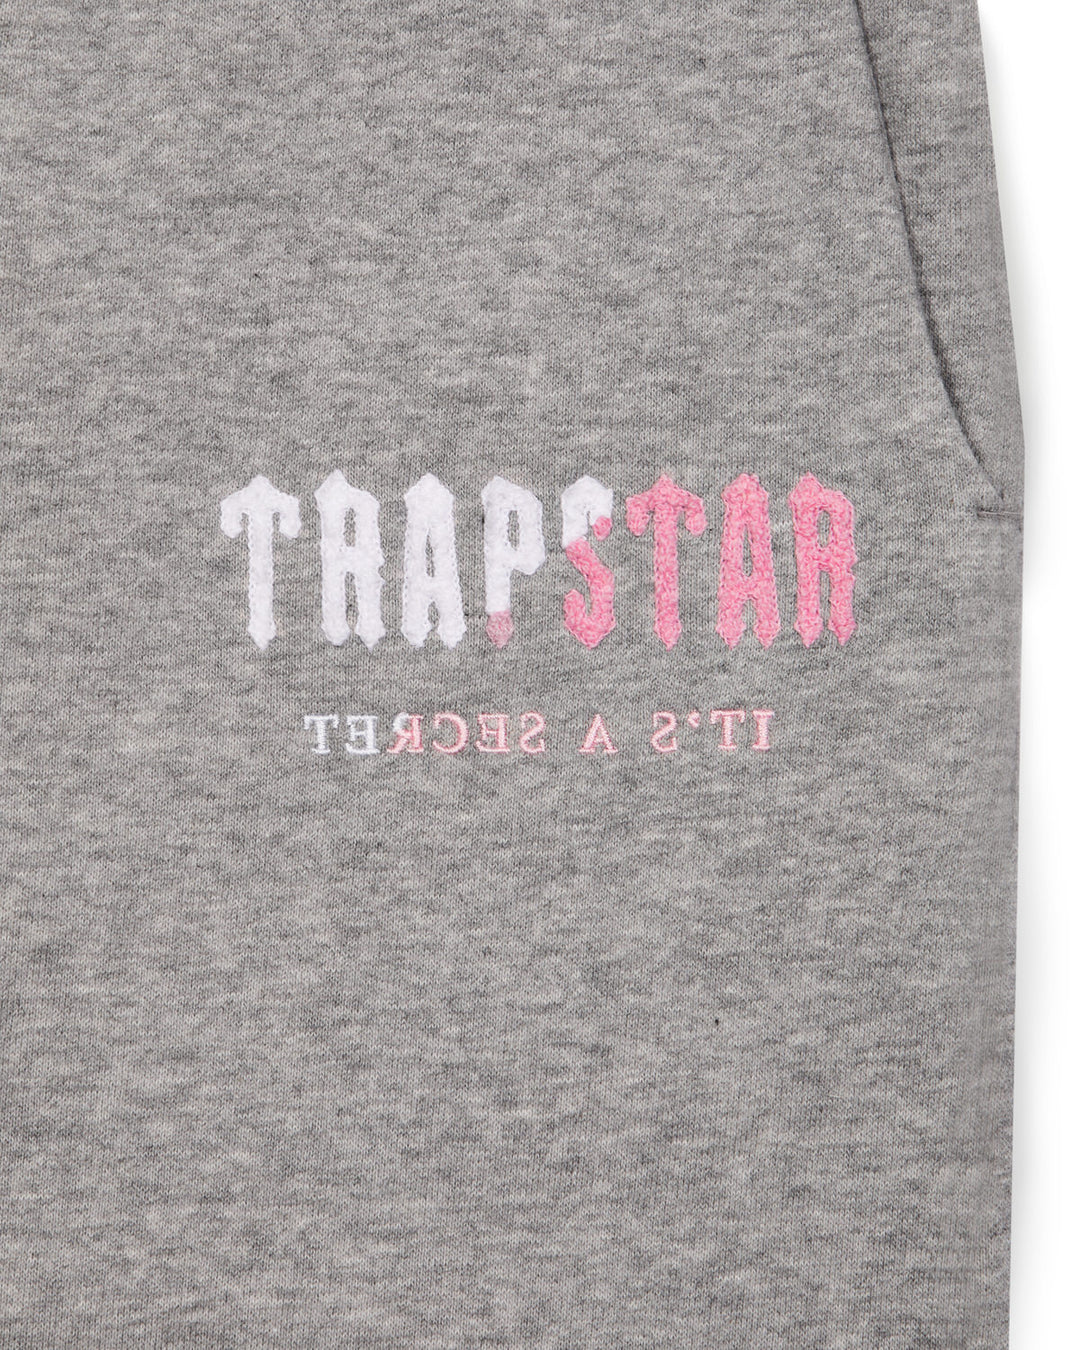 Trapstar Tracksuit Decoded Chenille - 'Grey/Pink'